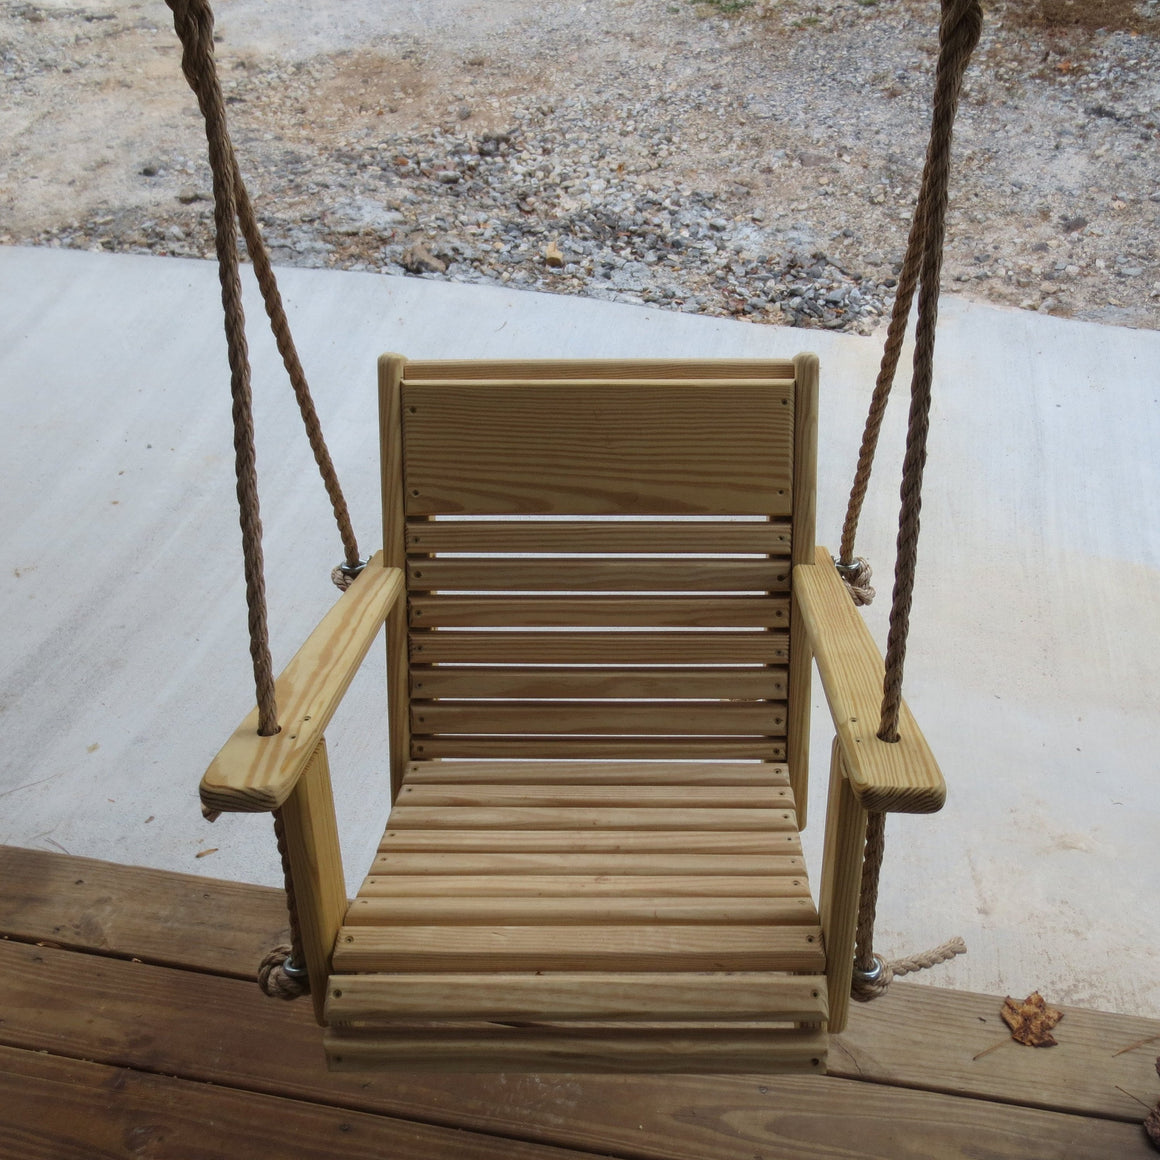 22" cypress chair rope swing